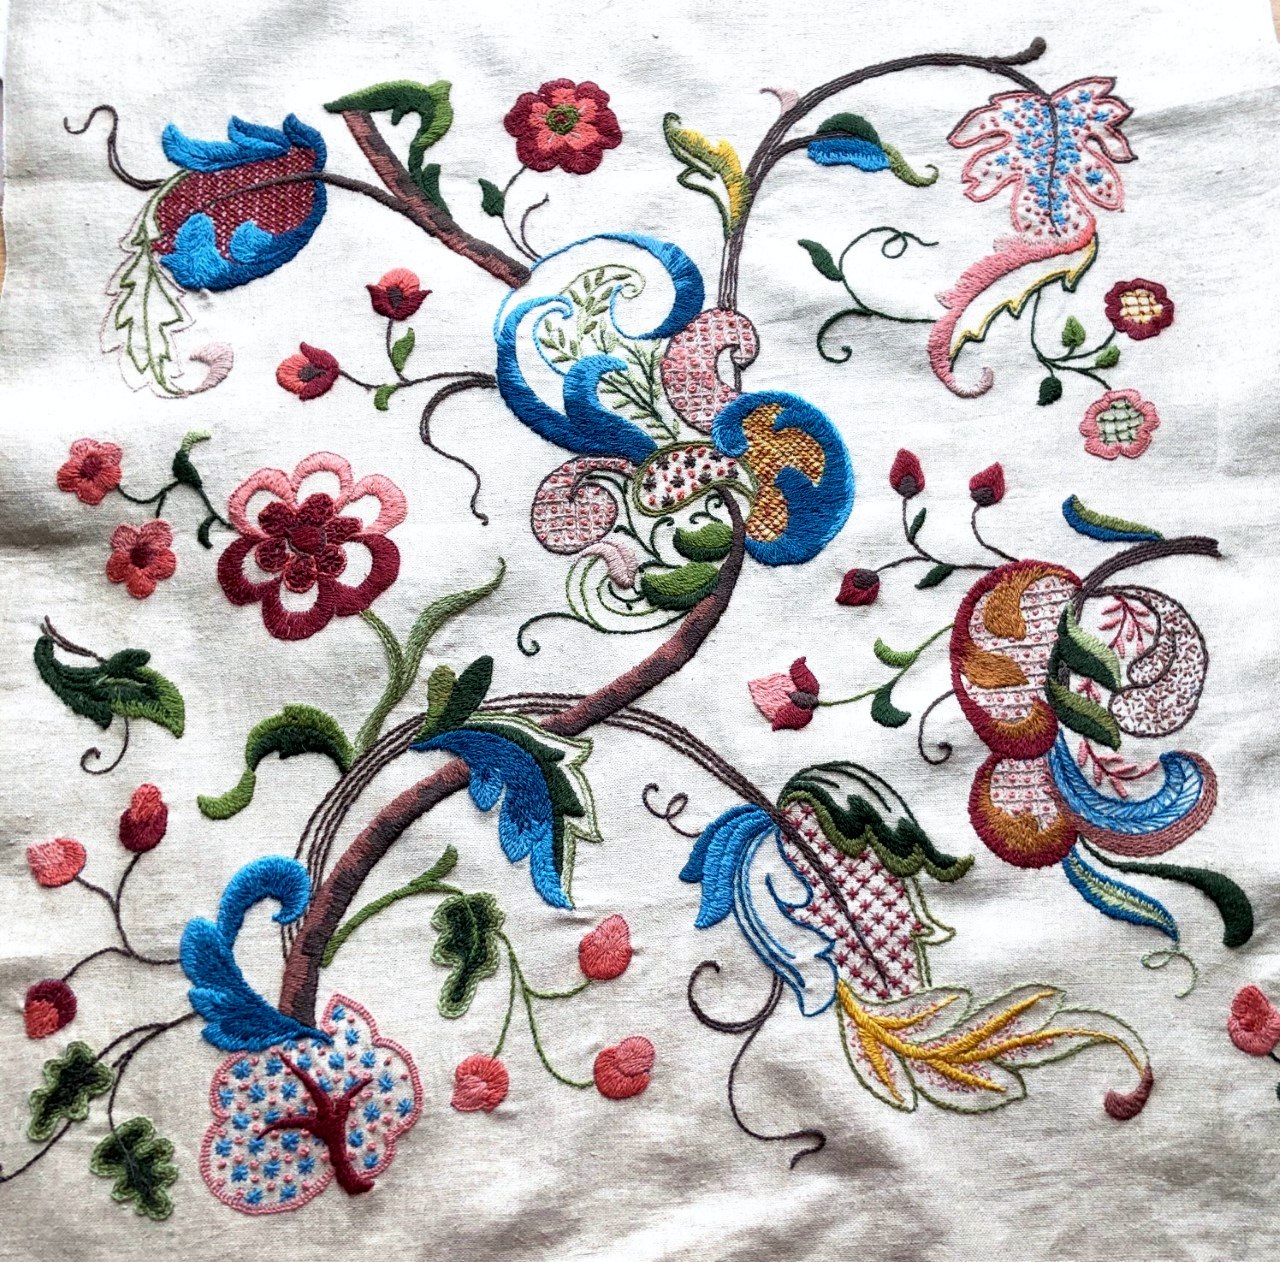 CHETWYND by Sarah Lowes, crewelwork, MEG display at NW Regional Day 2021